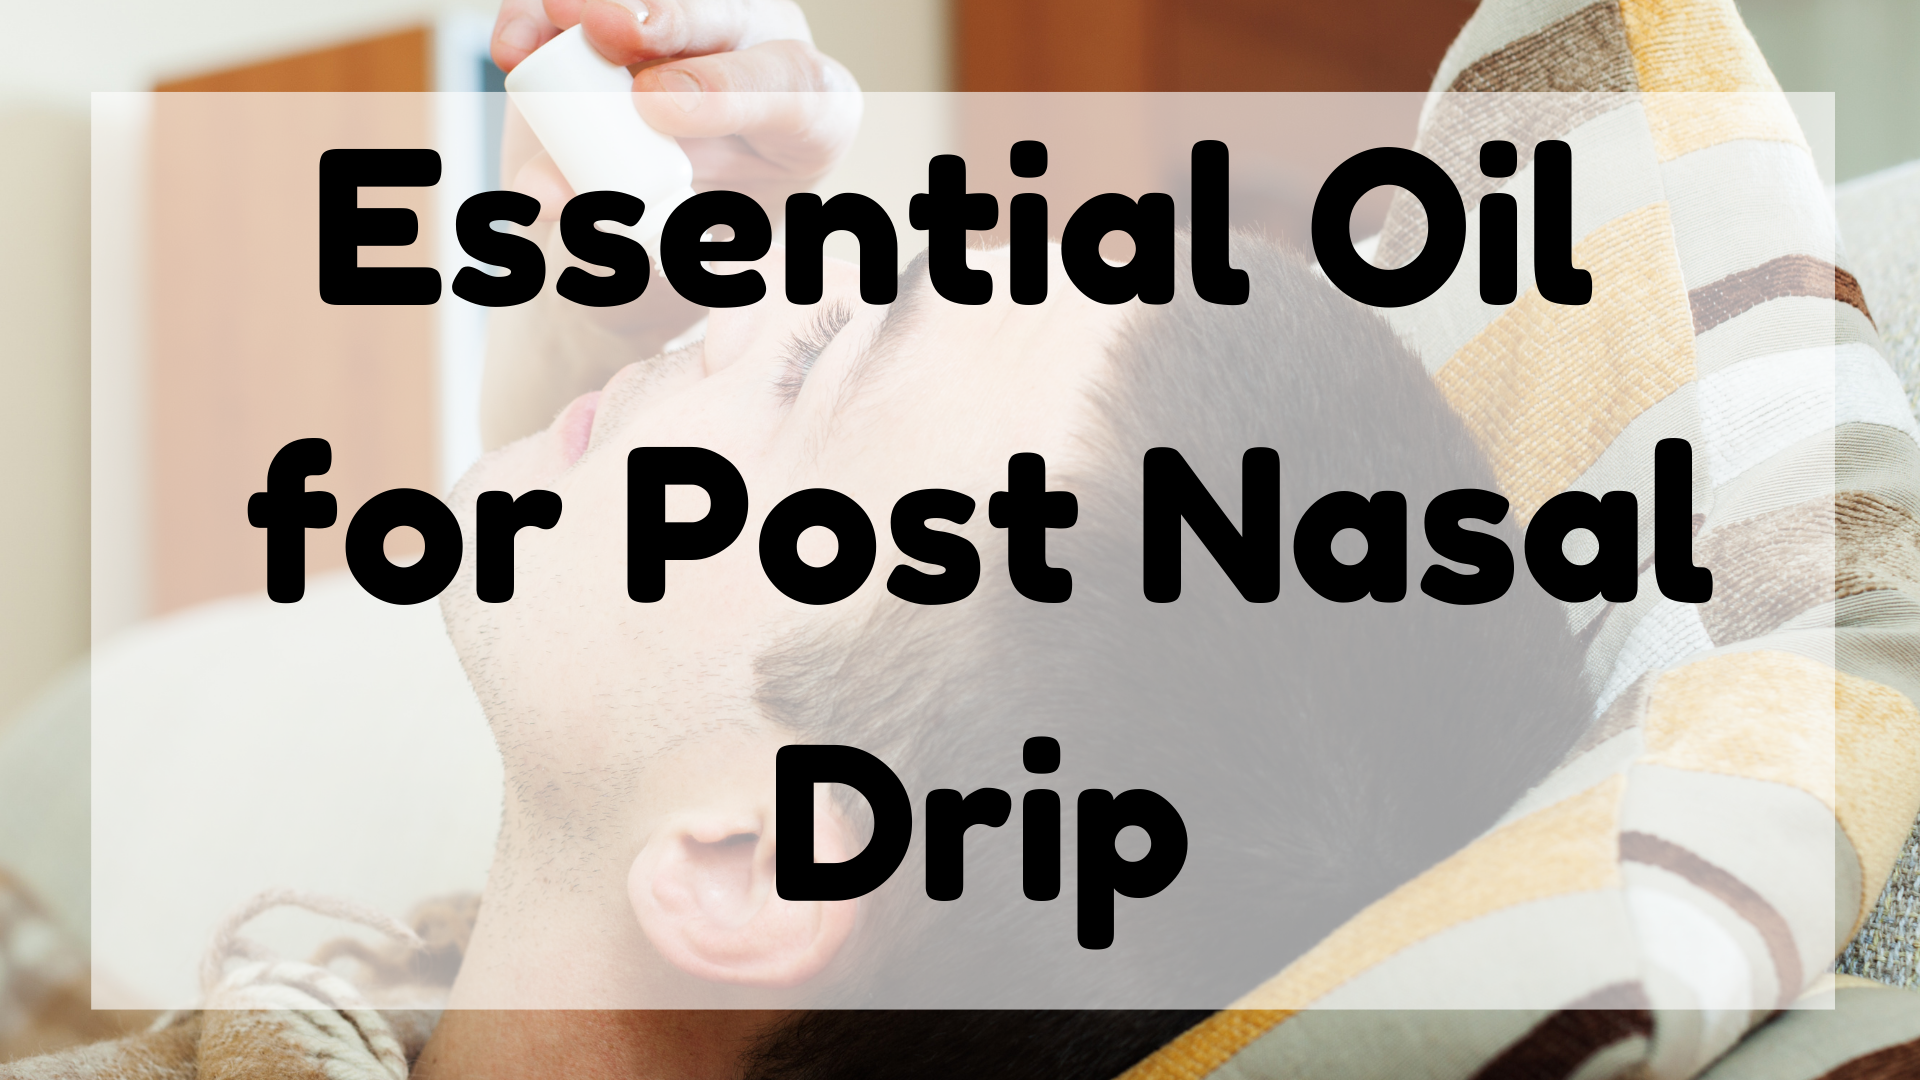 Essential Oil for Post Nasal Drip featured image